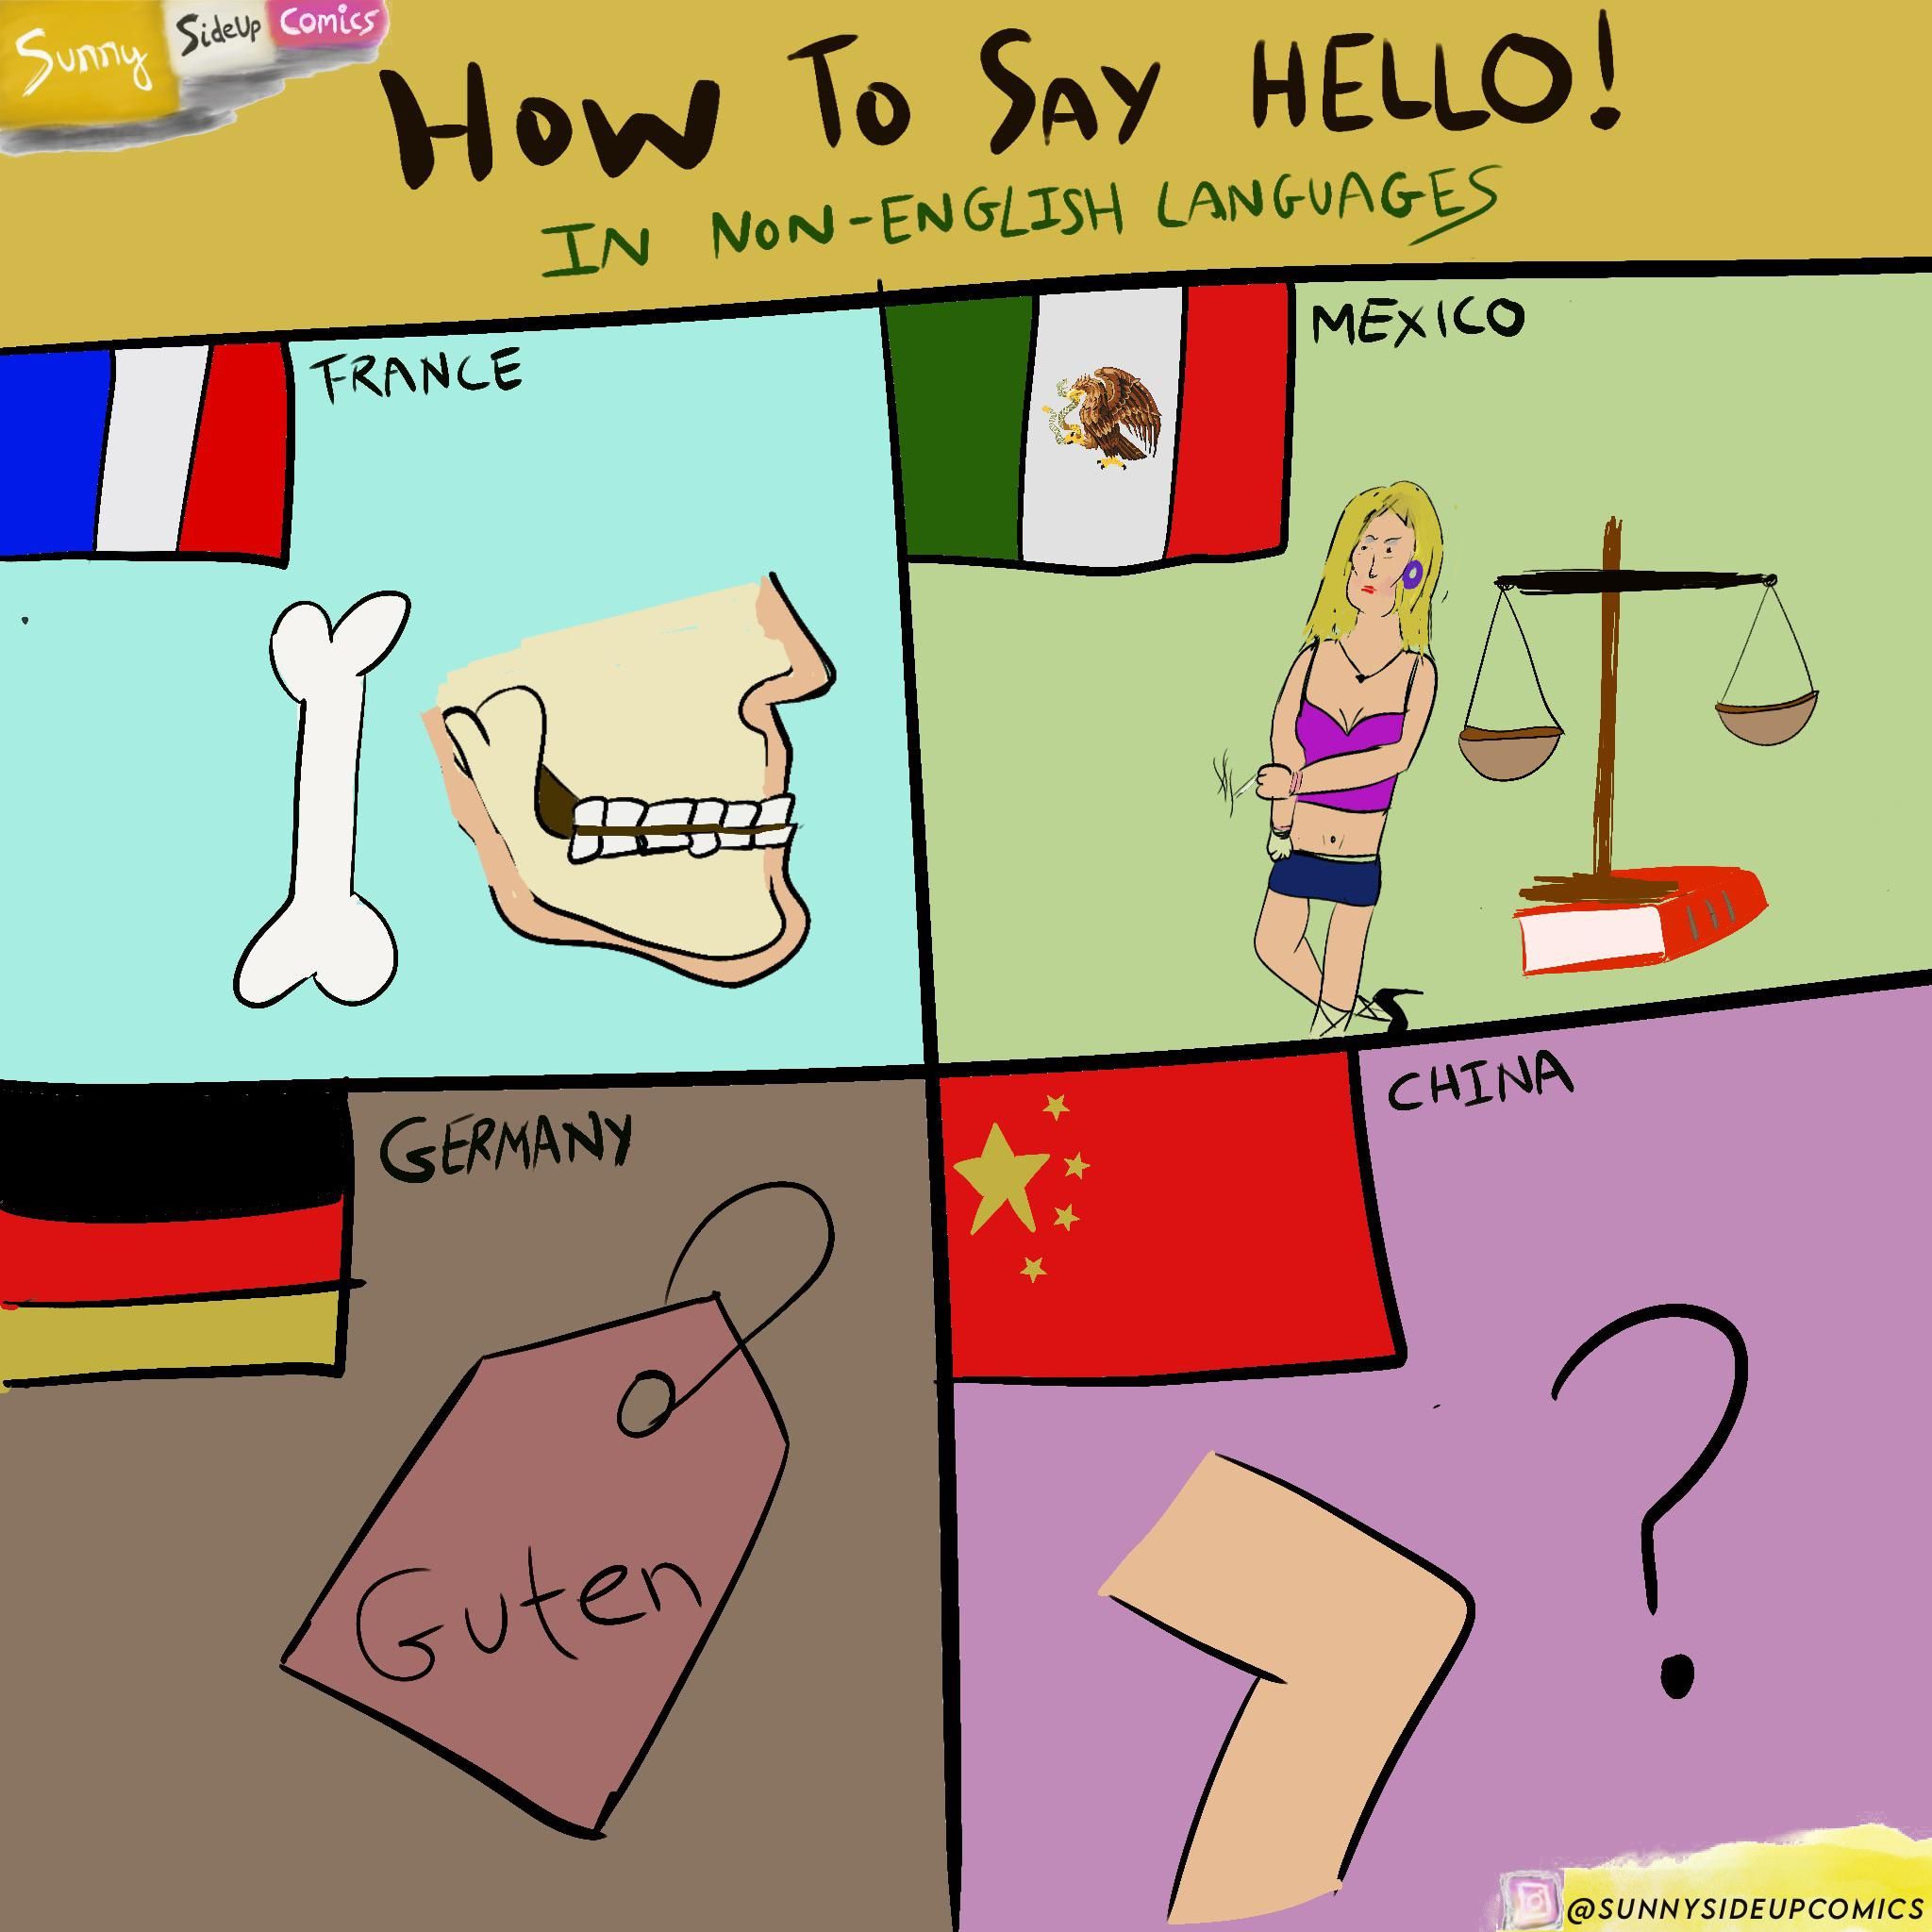 How to say ‘hello’ in non-English languages